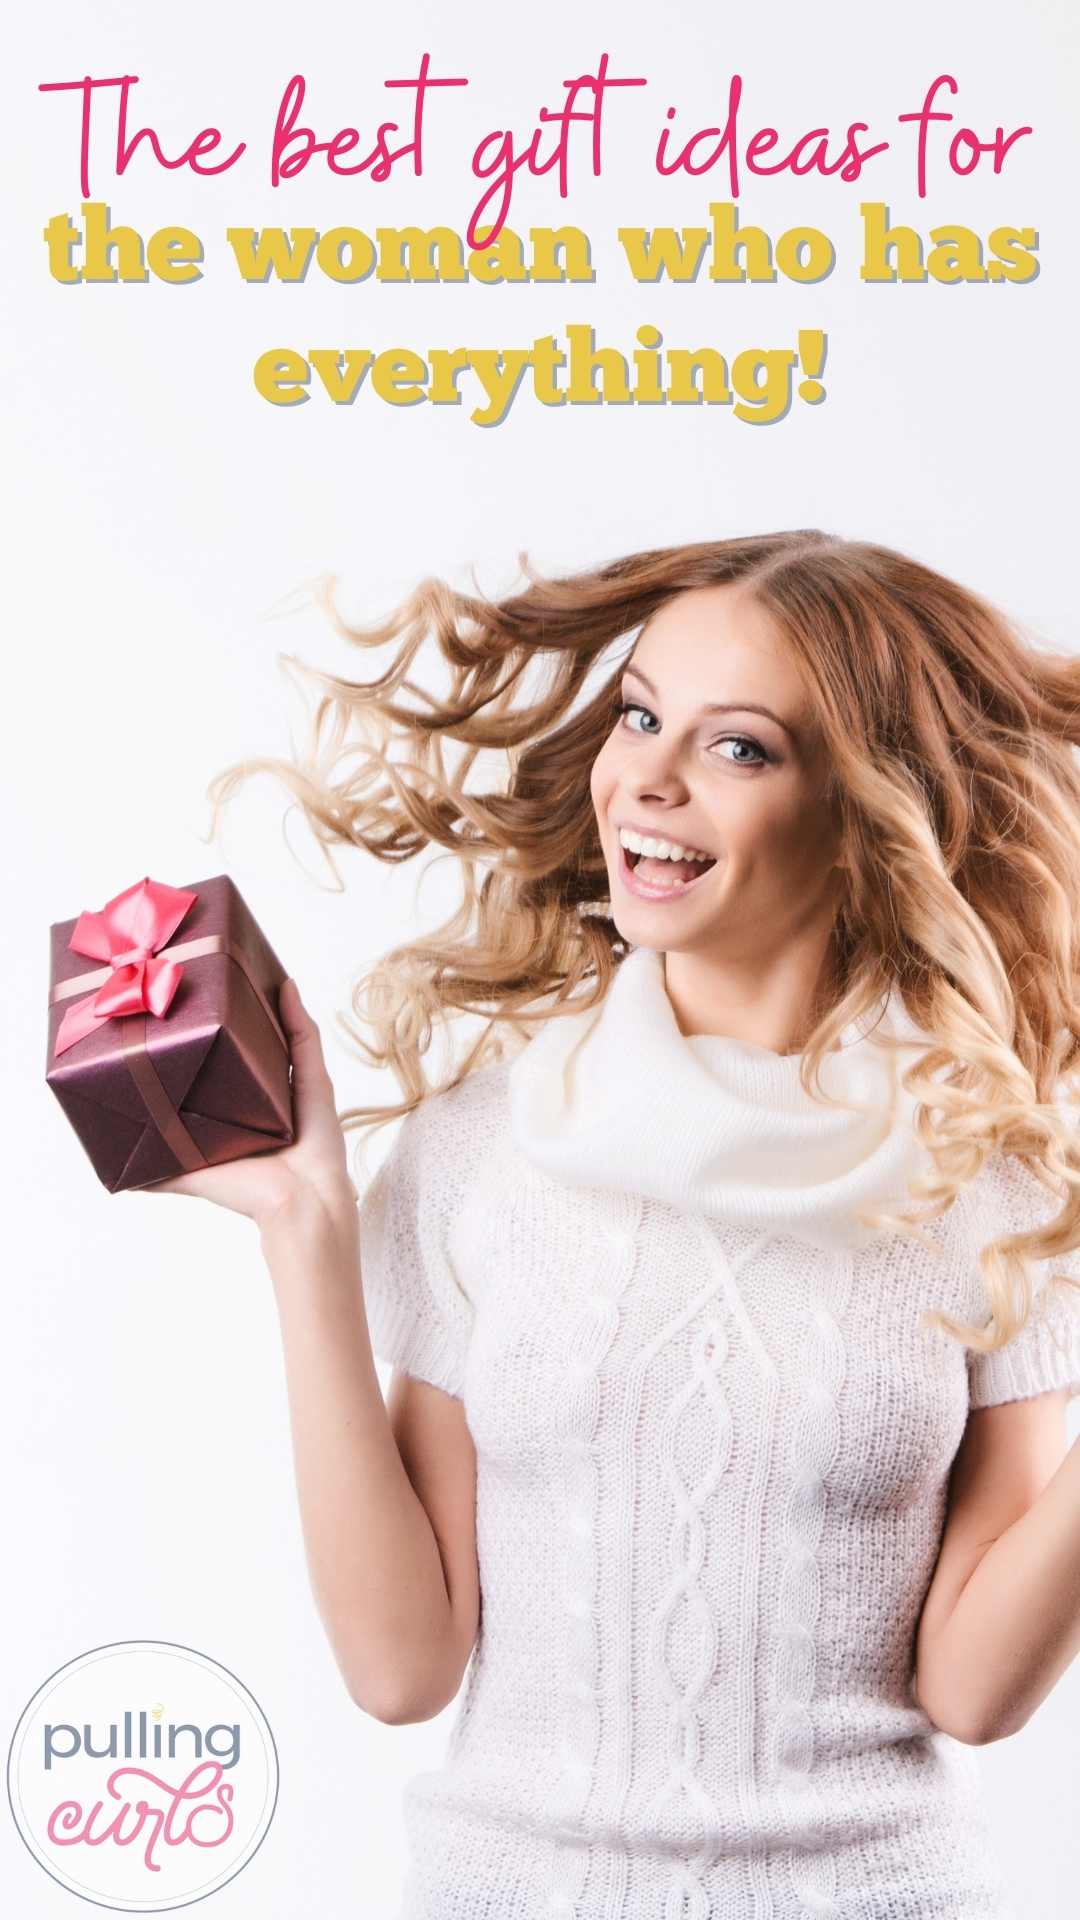 Looking for gift ideas for who have everything? -- Even if they're 50 or 60 there are still PLENTY of things they want or don't know they want. #gifts #women #christmas #mothersday #giftguide #present #womanwhohaseverything #mom via @pullingcurls